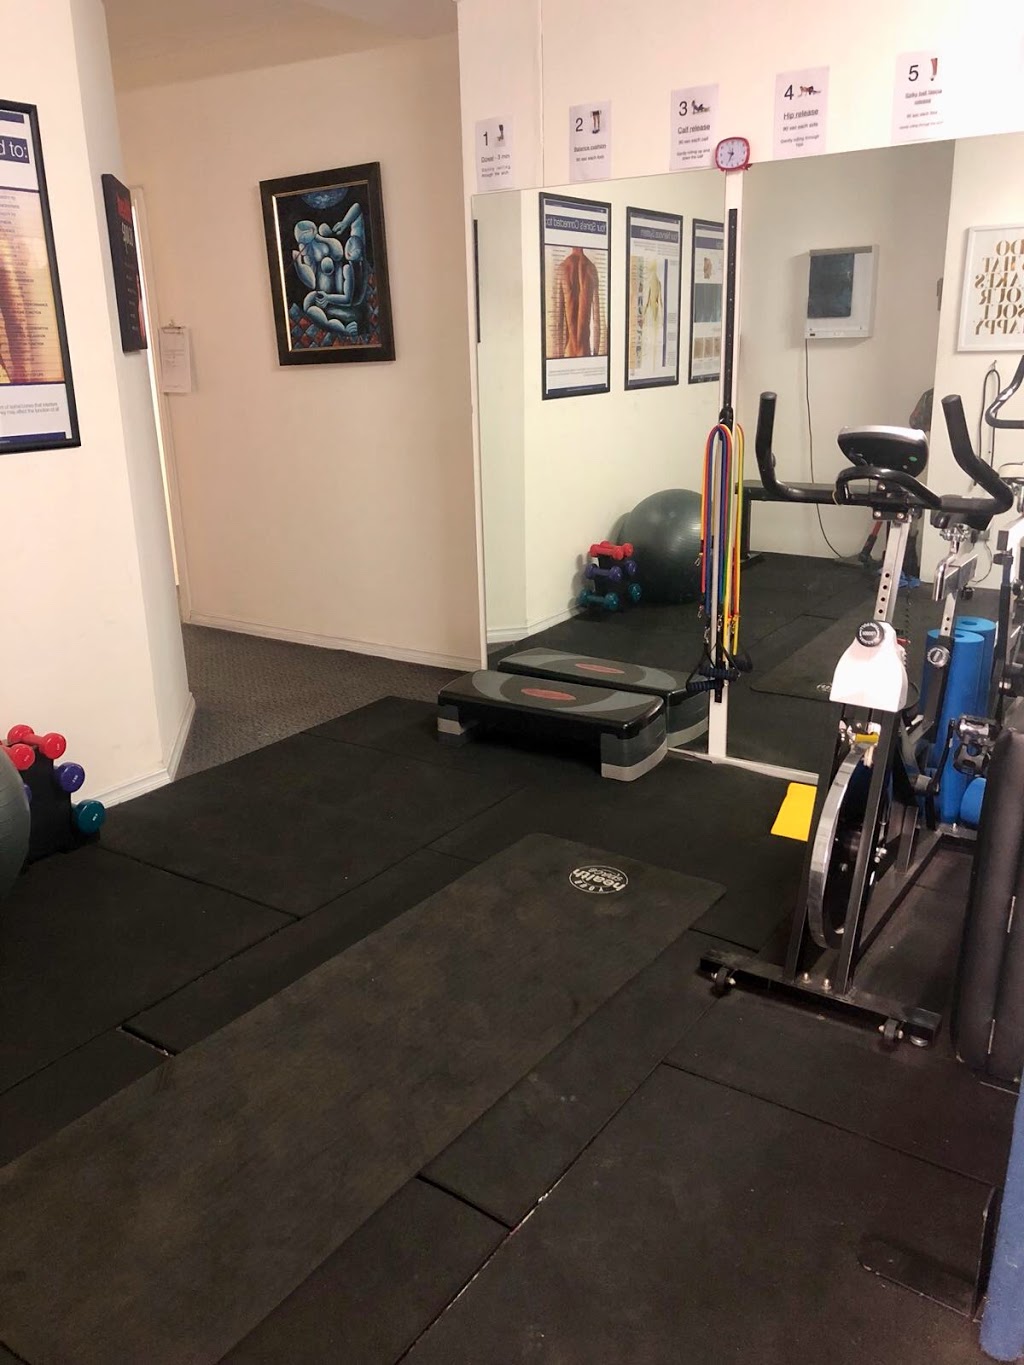 Health Space Kingsford | physiotherapist | shop 98/1-5 Meeks St, Kingsford NSW 2032, Australia | 0296632151 OR +61 2 9663 2151